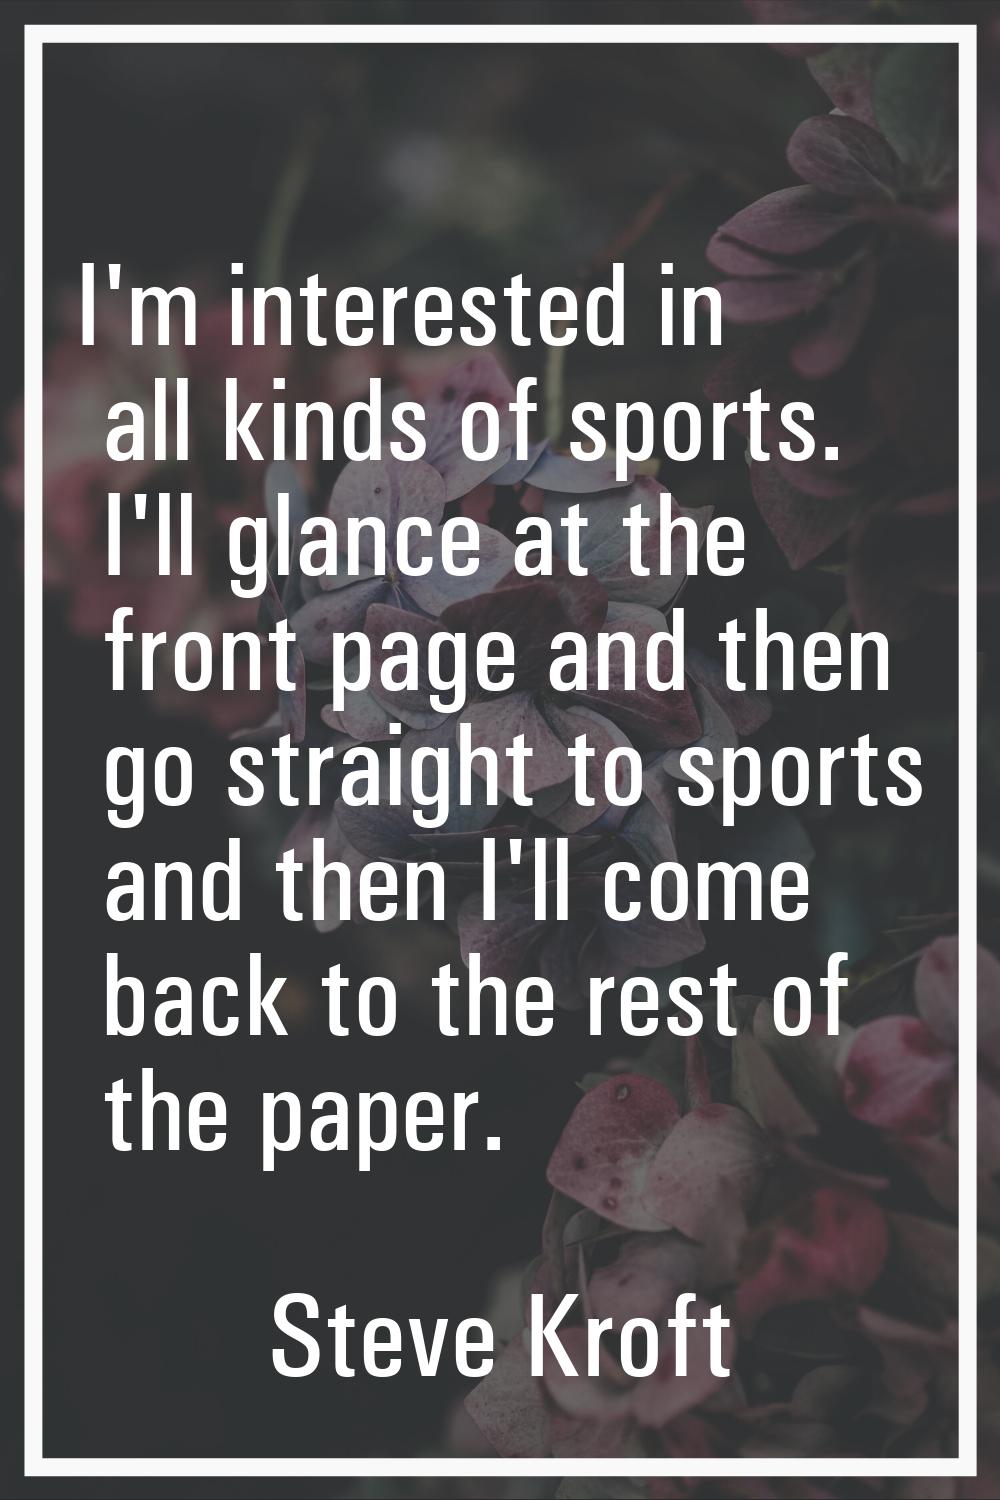 I'm interested in all kinds of sports. I'll glance at the front page and then go straight to sports